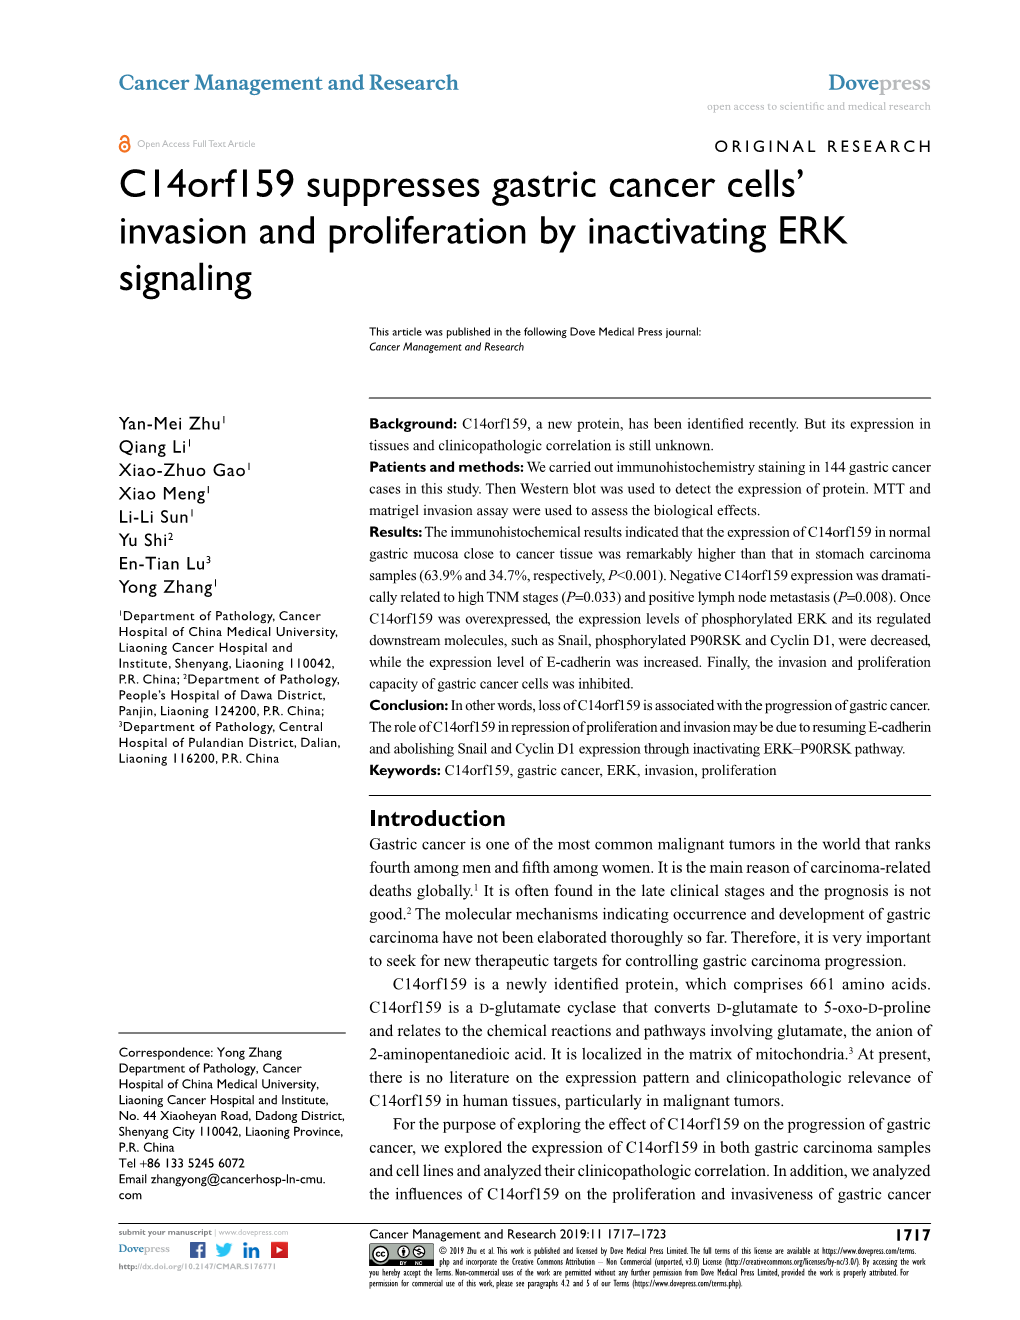 C14orf159 Suppresses Gastric Cancer Cells' Invasion and Proliferation By